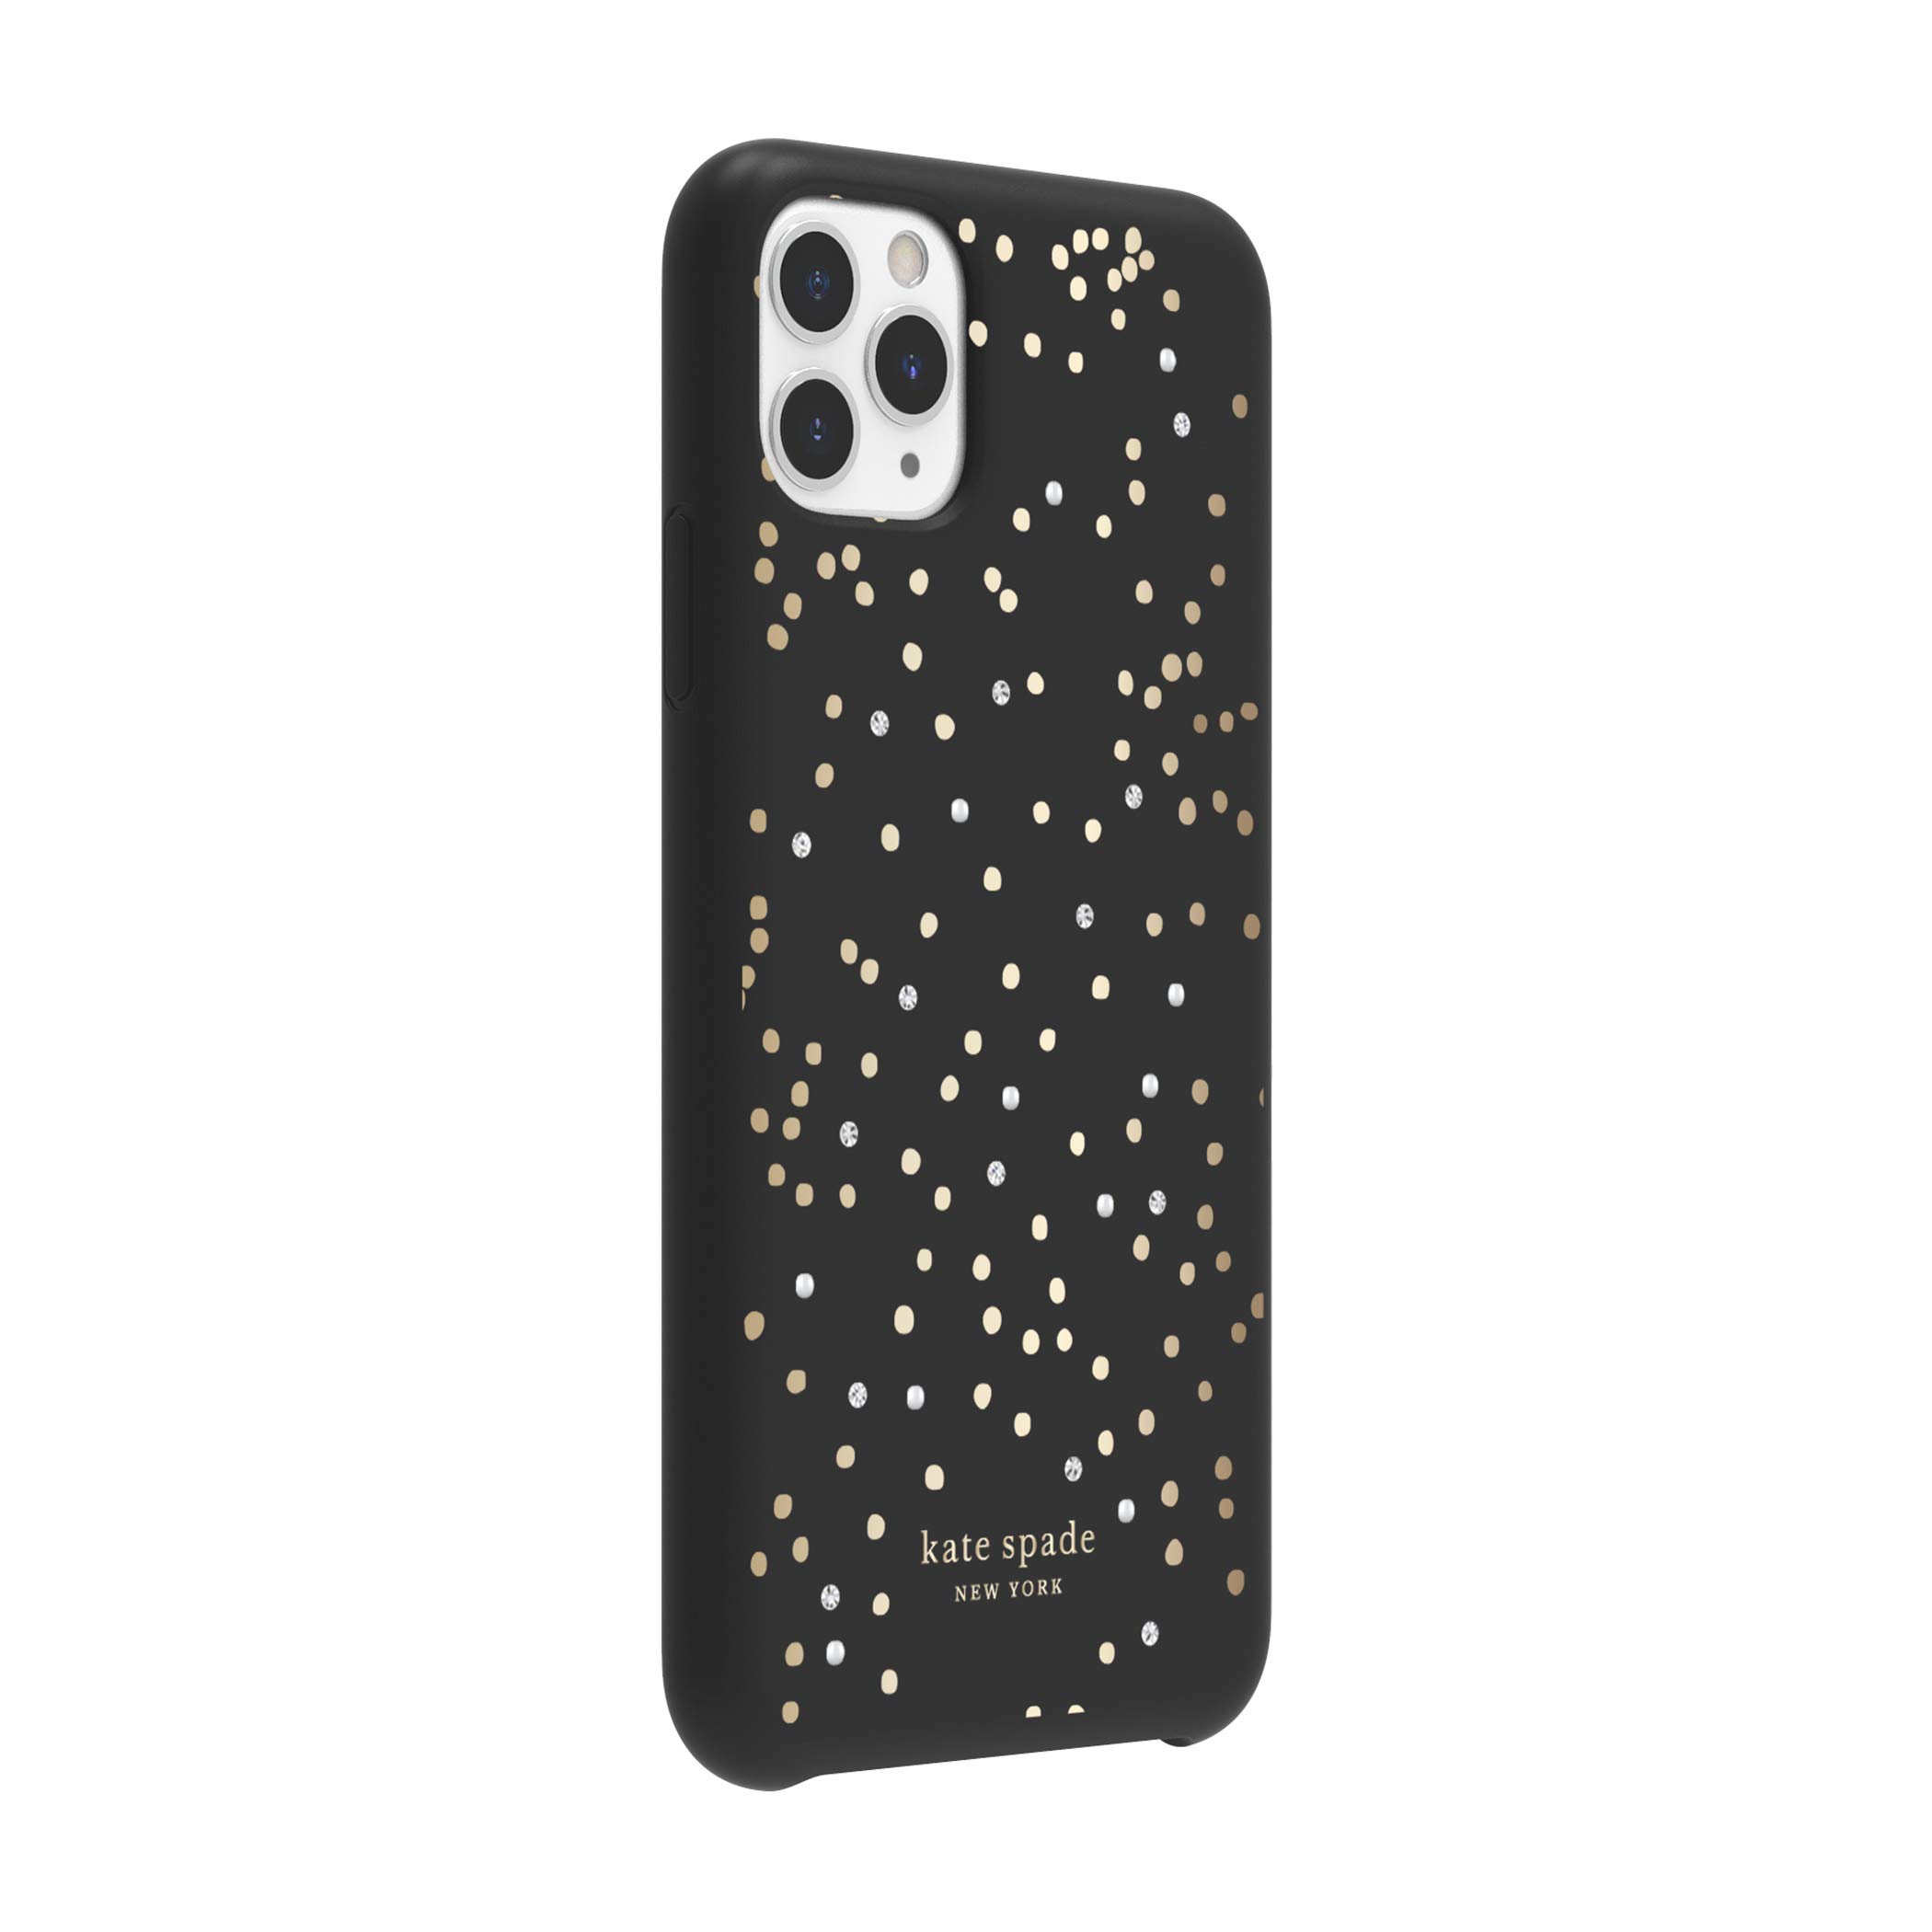 kate spade new york Disco Dots Case for iPhone 11 Pro Max,Thermoplastic Polyurethane - Soft Touch Protective Hardshell